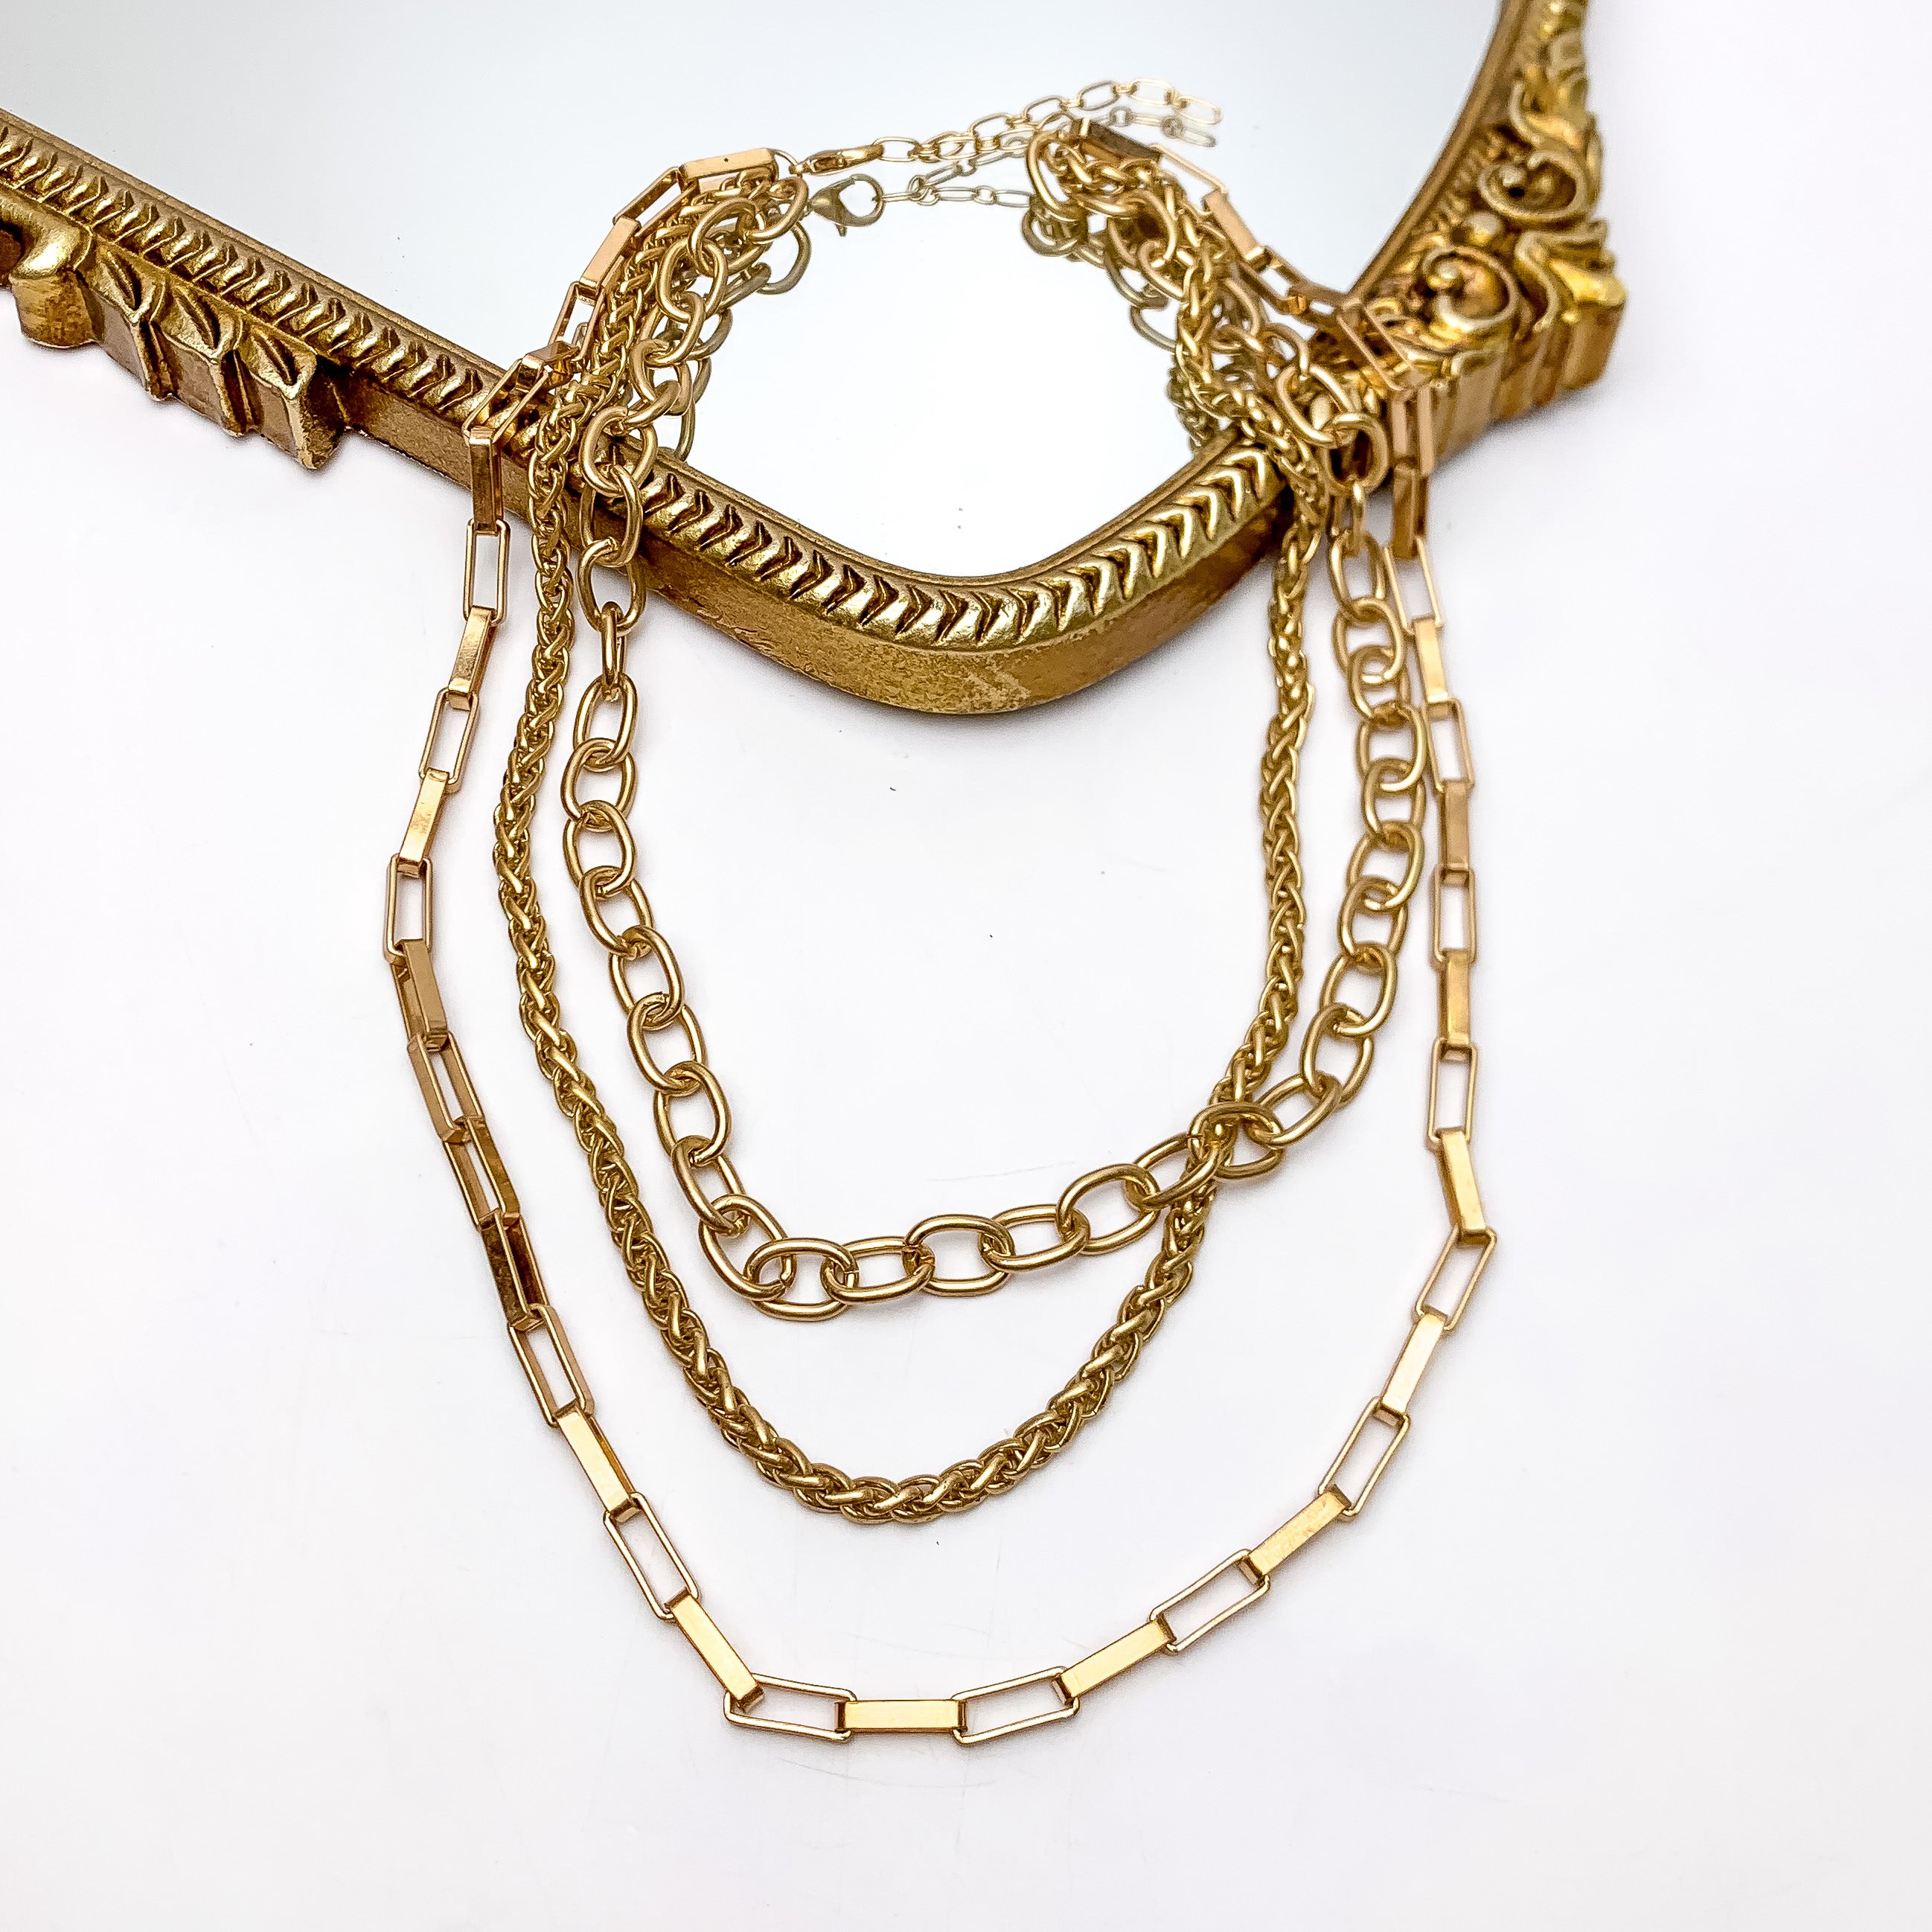 Triple Strand Variety Gold Tone Chain Necklace. This necklace is pictured on a white background with part of it laying on a gold trimmed mirror.